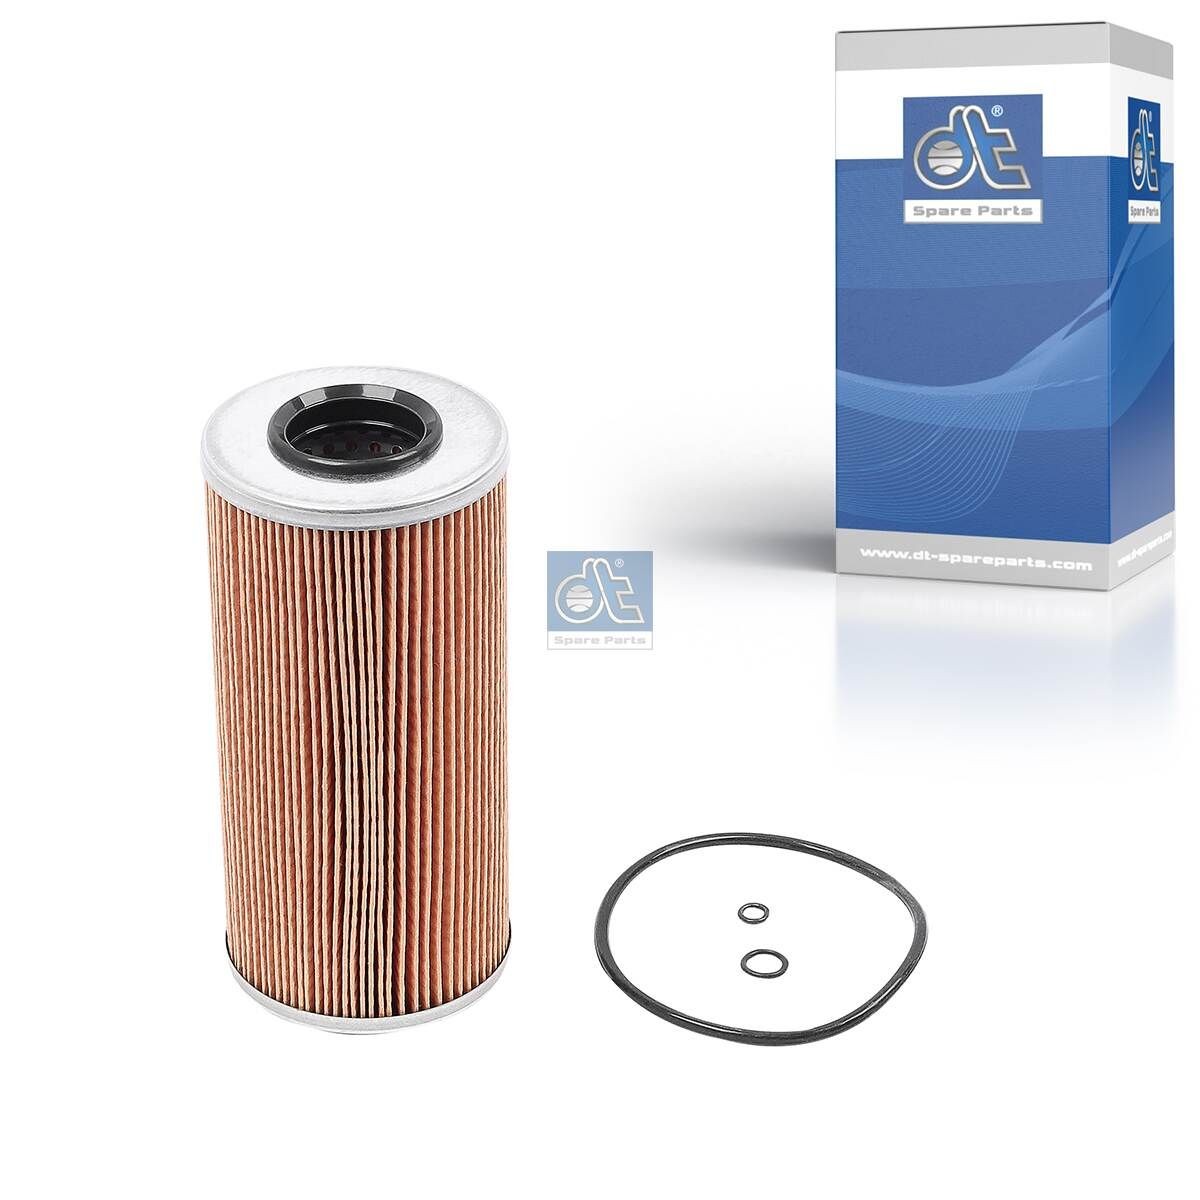 HU 951 x DT Spare Parts 3.14108 Oil filter A 628 180 00 09